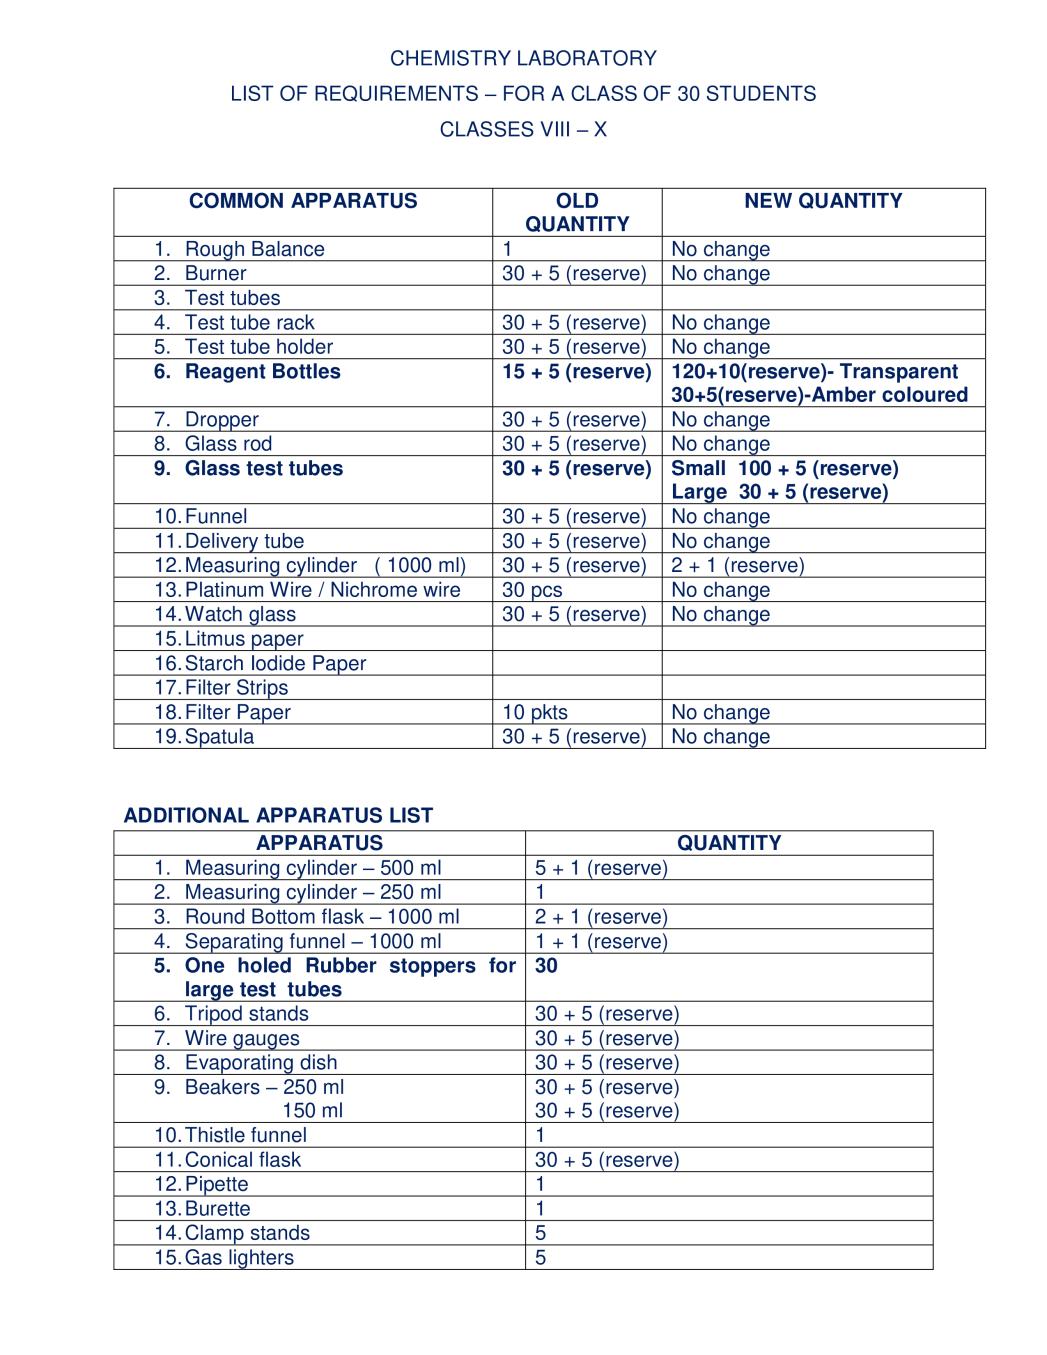 ICSE Chemistry Lab Manual for Class 8, 9, 10 - Page 1